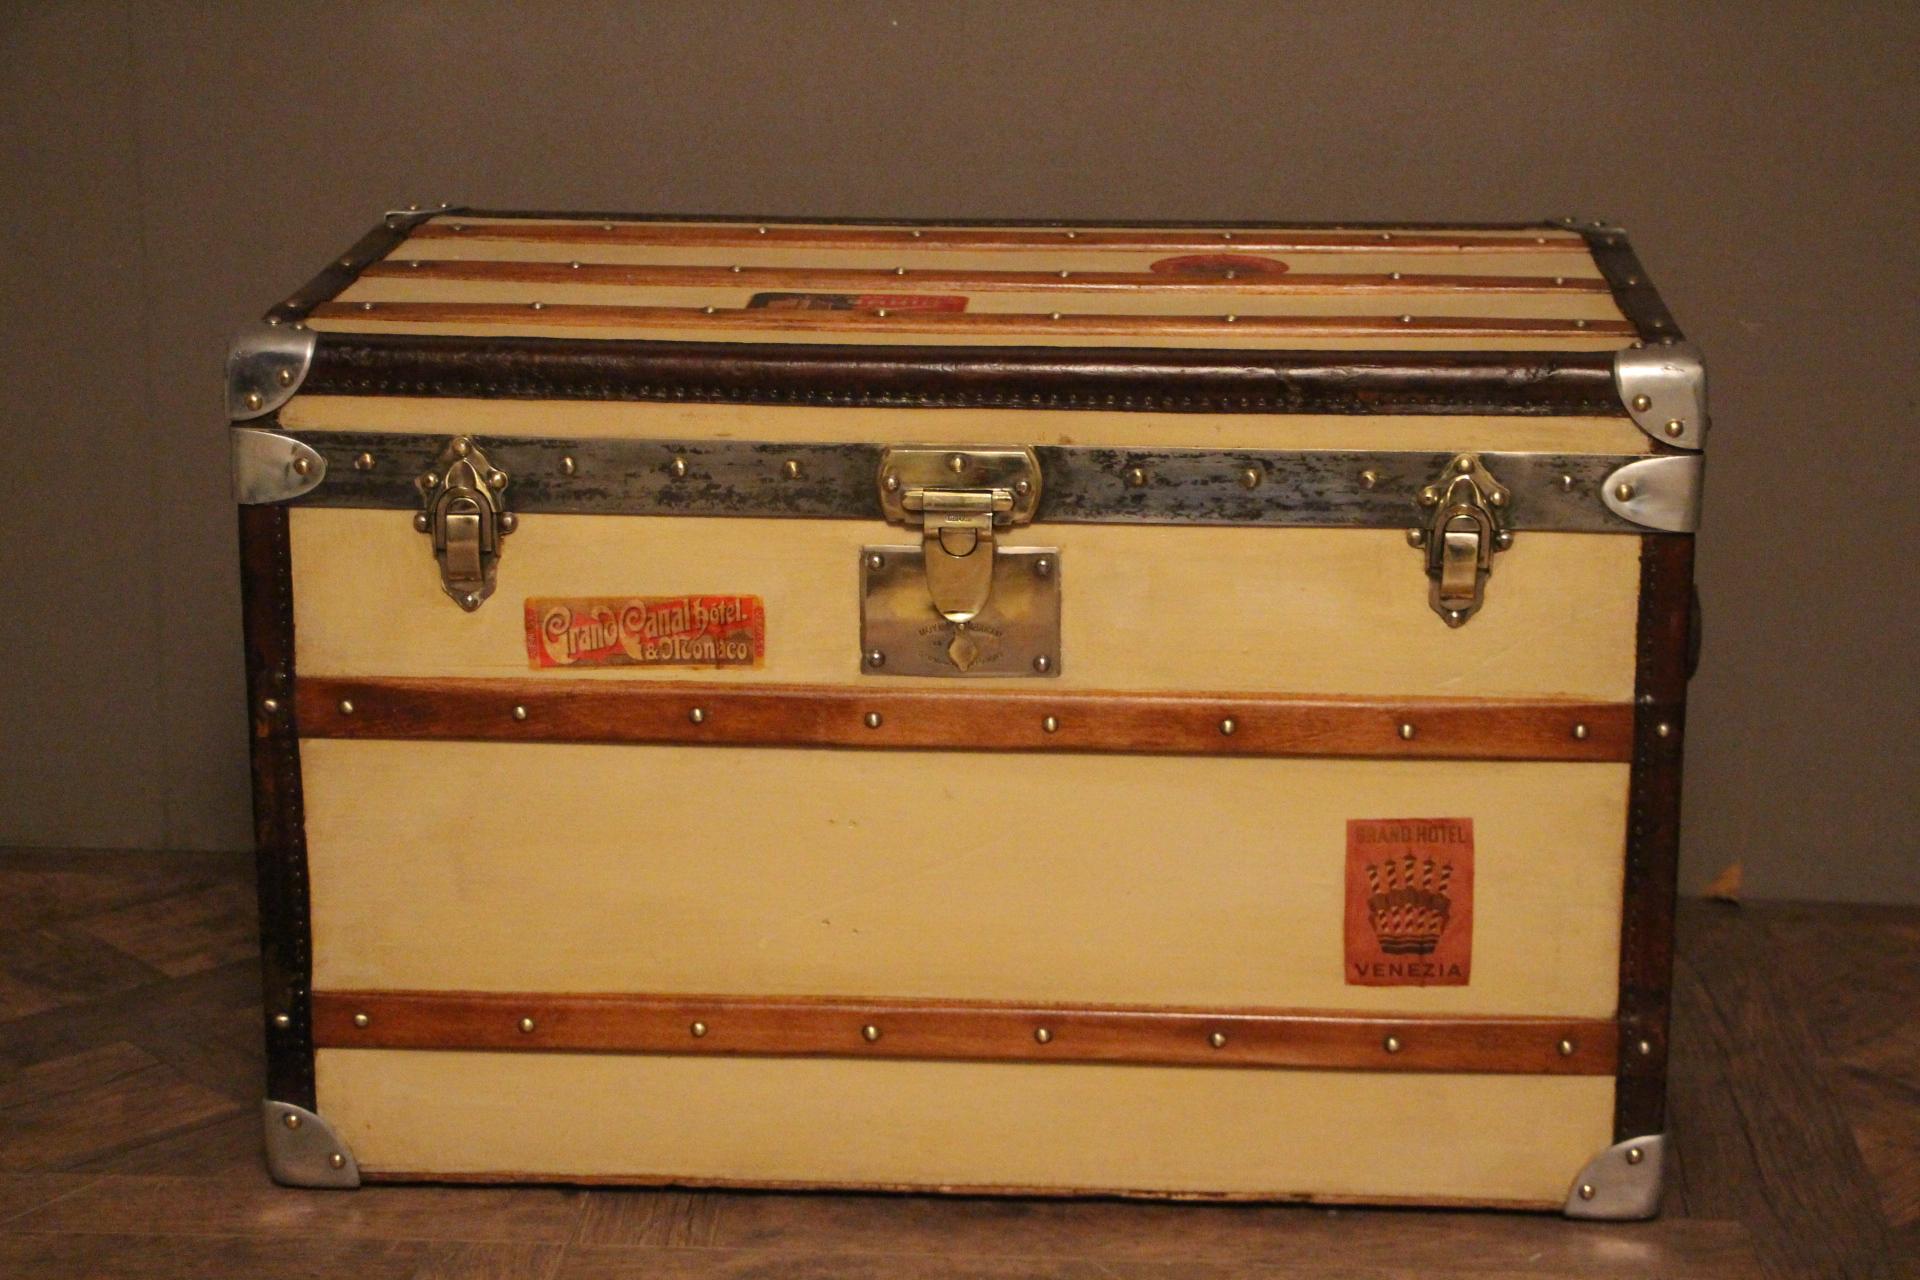 This nice steamer trunk features beige canvas, leather trim and side handles silver aluminum corners and brass locks.
A couple of travel labels.
Its main lock as well as its handle latches are marked 